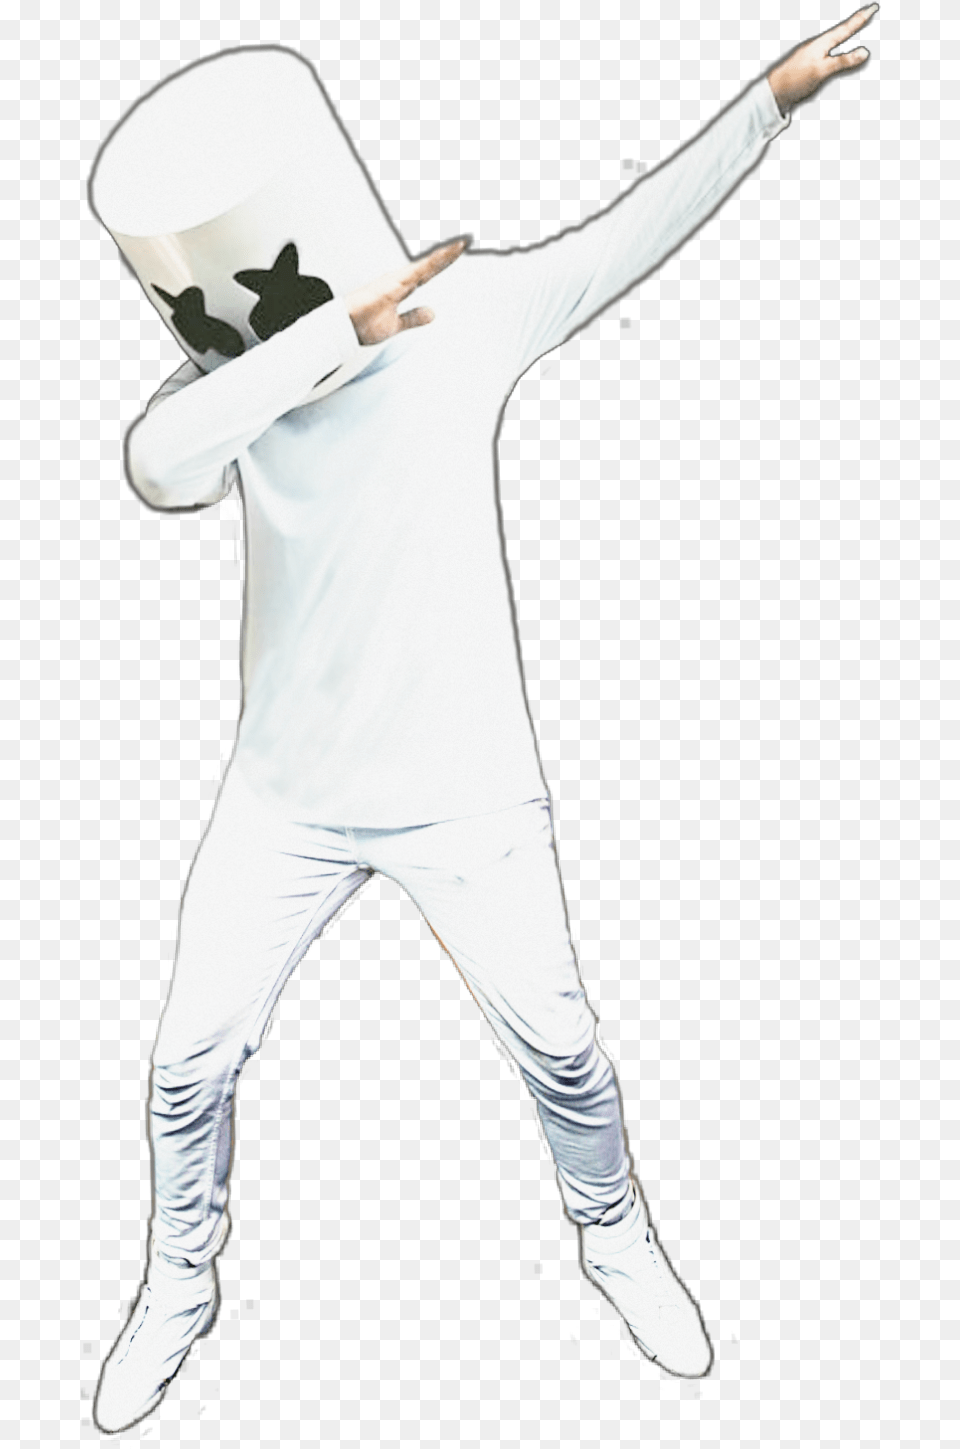 Ftestickers People Dj Marshmello Dab Dance Party Dab Dj, Clothing, Hat, Adult, Person Png Image